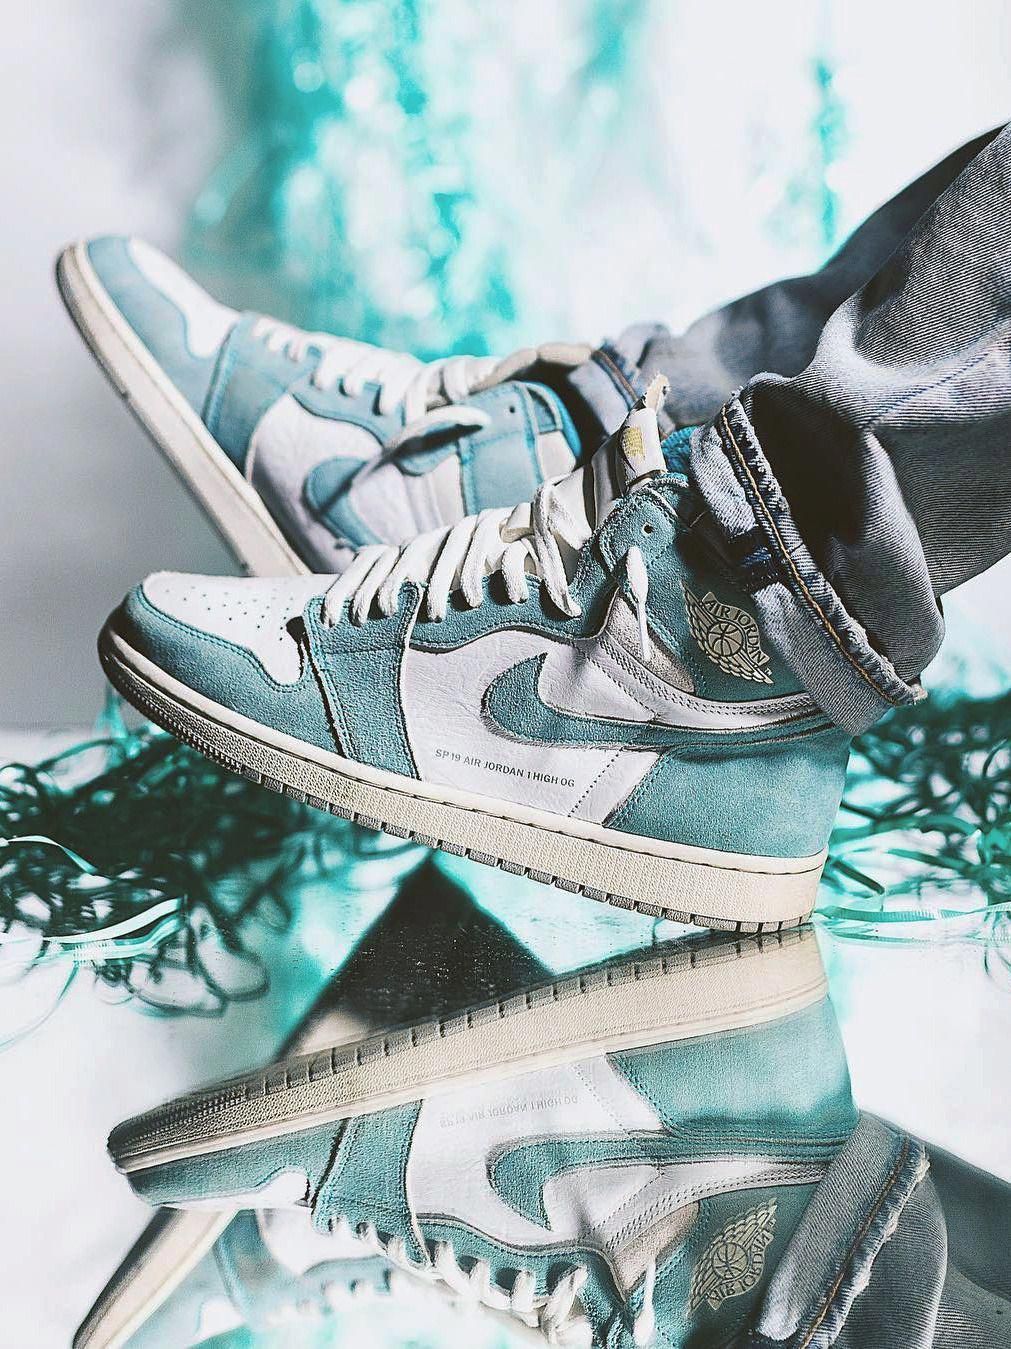 A pair of feet wearing a pair of sneakers with a light blue and white color scheme. - Air Jordan 1